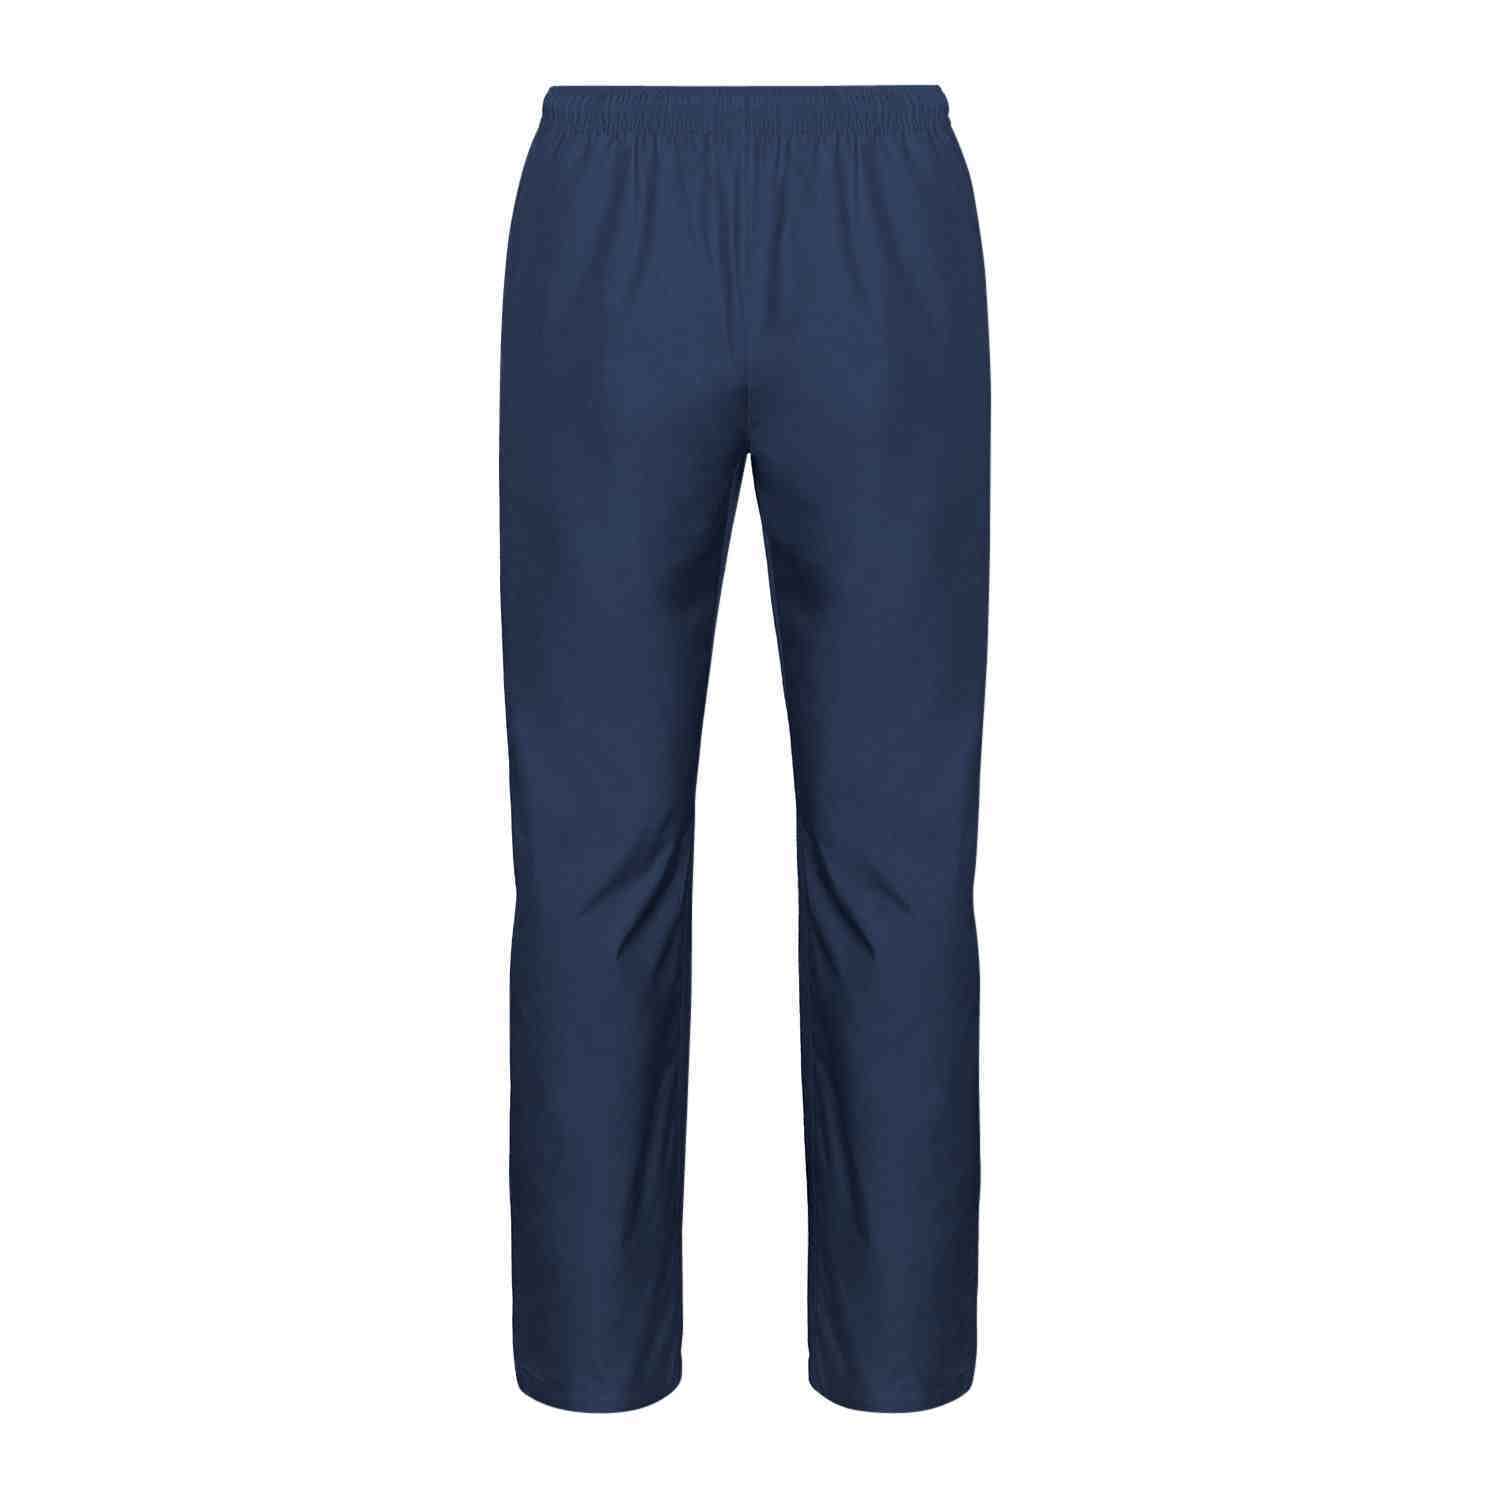 https://workcasualwear.ca/images/thumbs/0002275_cx2-score-mesh-lined-track-pant.jpeg